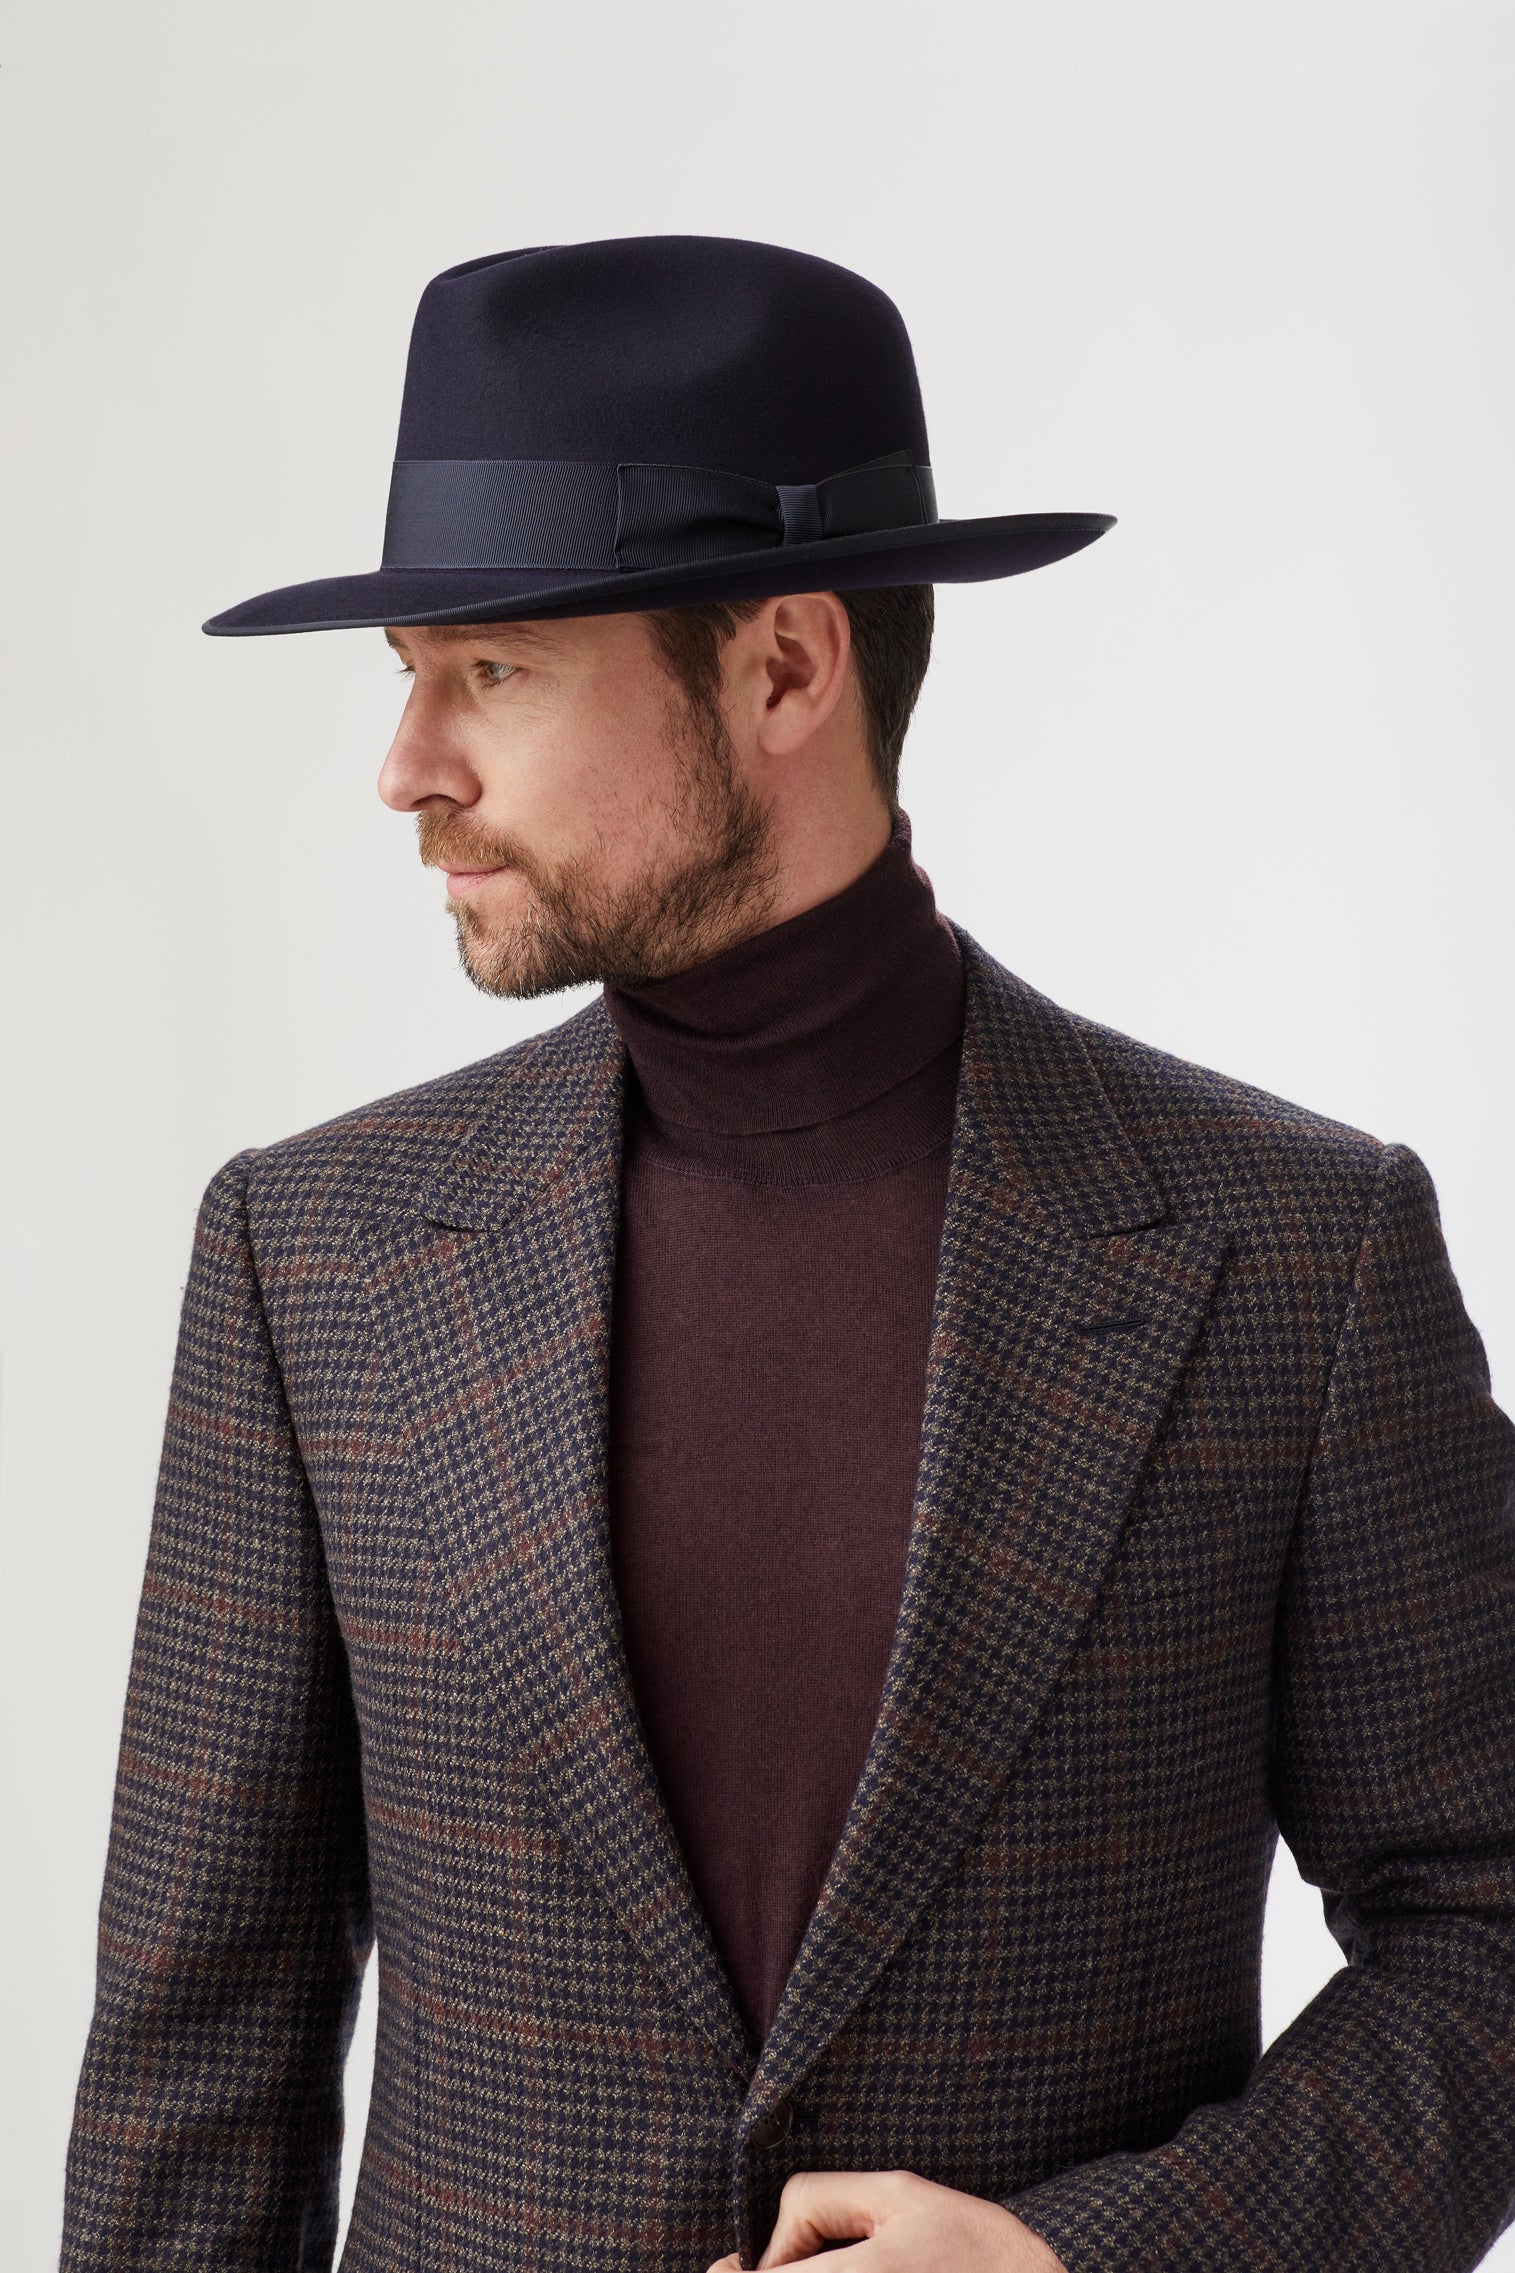 St James's Fedora - Hats for Oval Face Shapes - Lock & Co. Hatters London UK